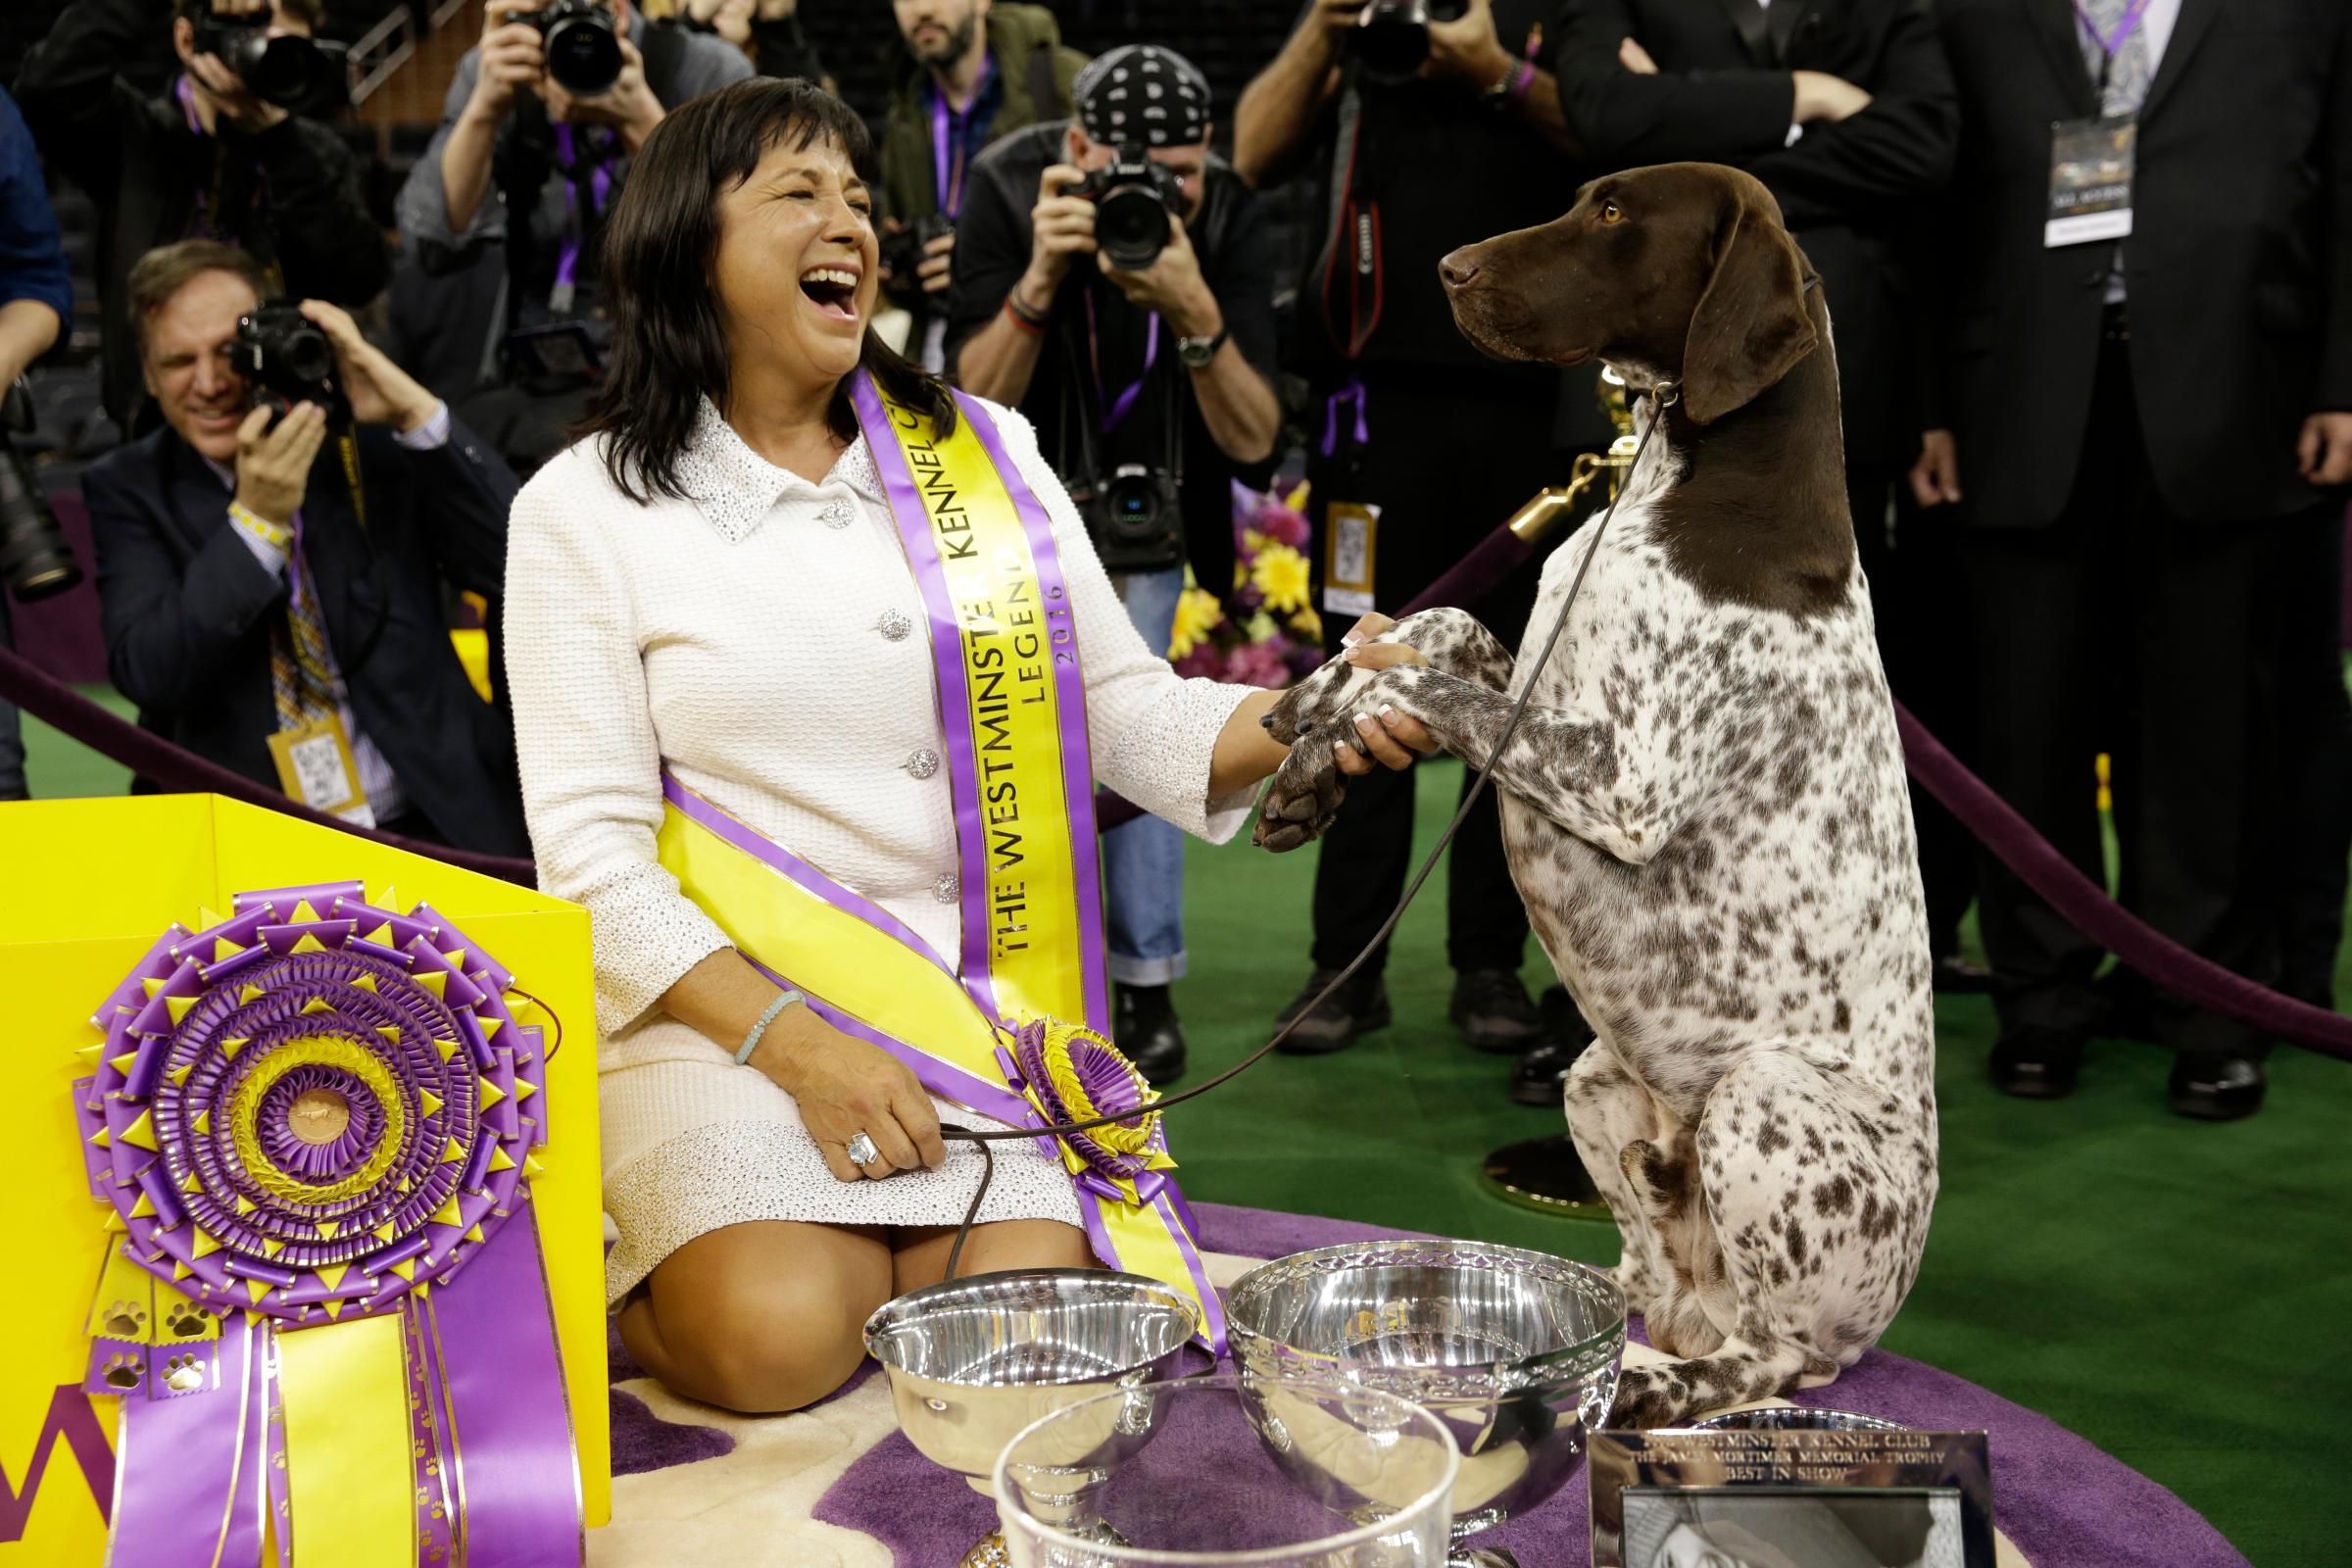 Valerie Nunes-Atkinson and CJ, a German shorthaired pointer, pose for photographers after CJ won best in show at the 140th Westminster Kennel Club dog show at Madison Square Garden in New York City, on Feb. 16, 2016.